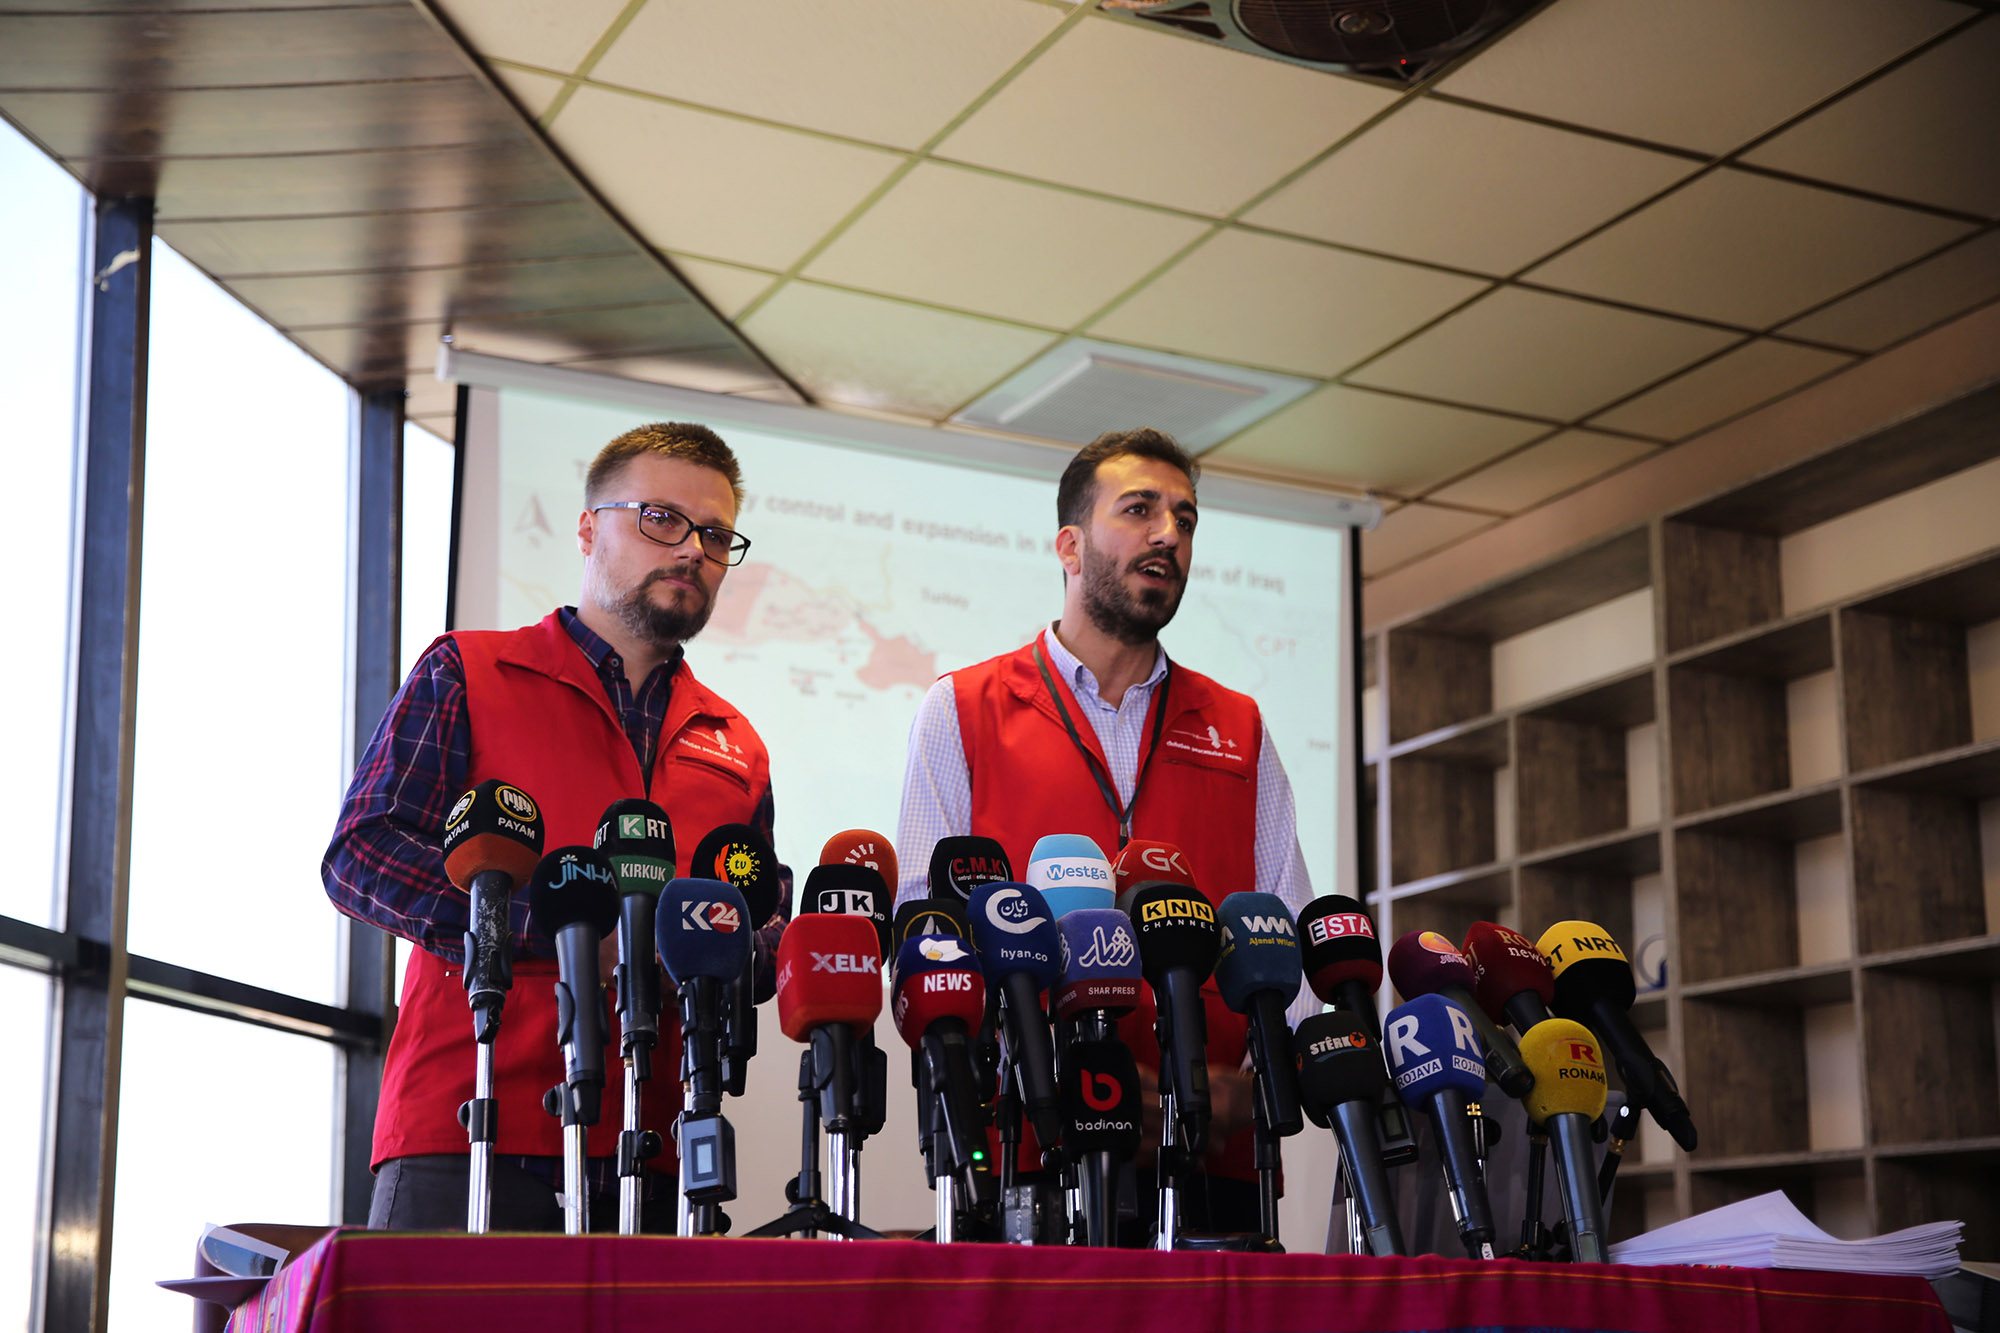 Iraqi Kurdistan: On June 3, CPT - IK held a press conference in Kurdish and English about the Turkish military operation “Claw Lightning.” CPT team members Lukasz (pictured left) and Kamaran (right), spoke to the media about the environmental, economic and civilian impact of the operation in Iraqi Kurdistan.